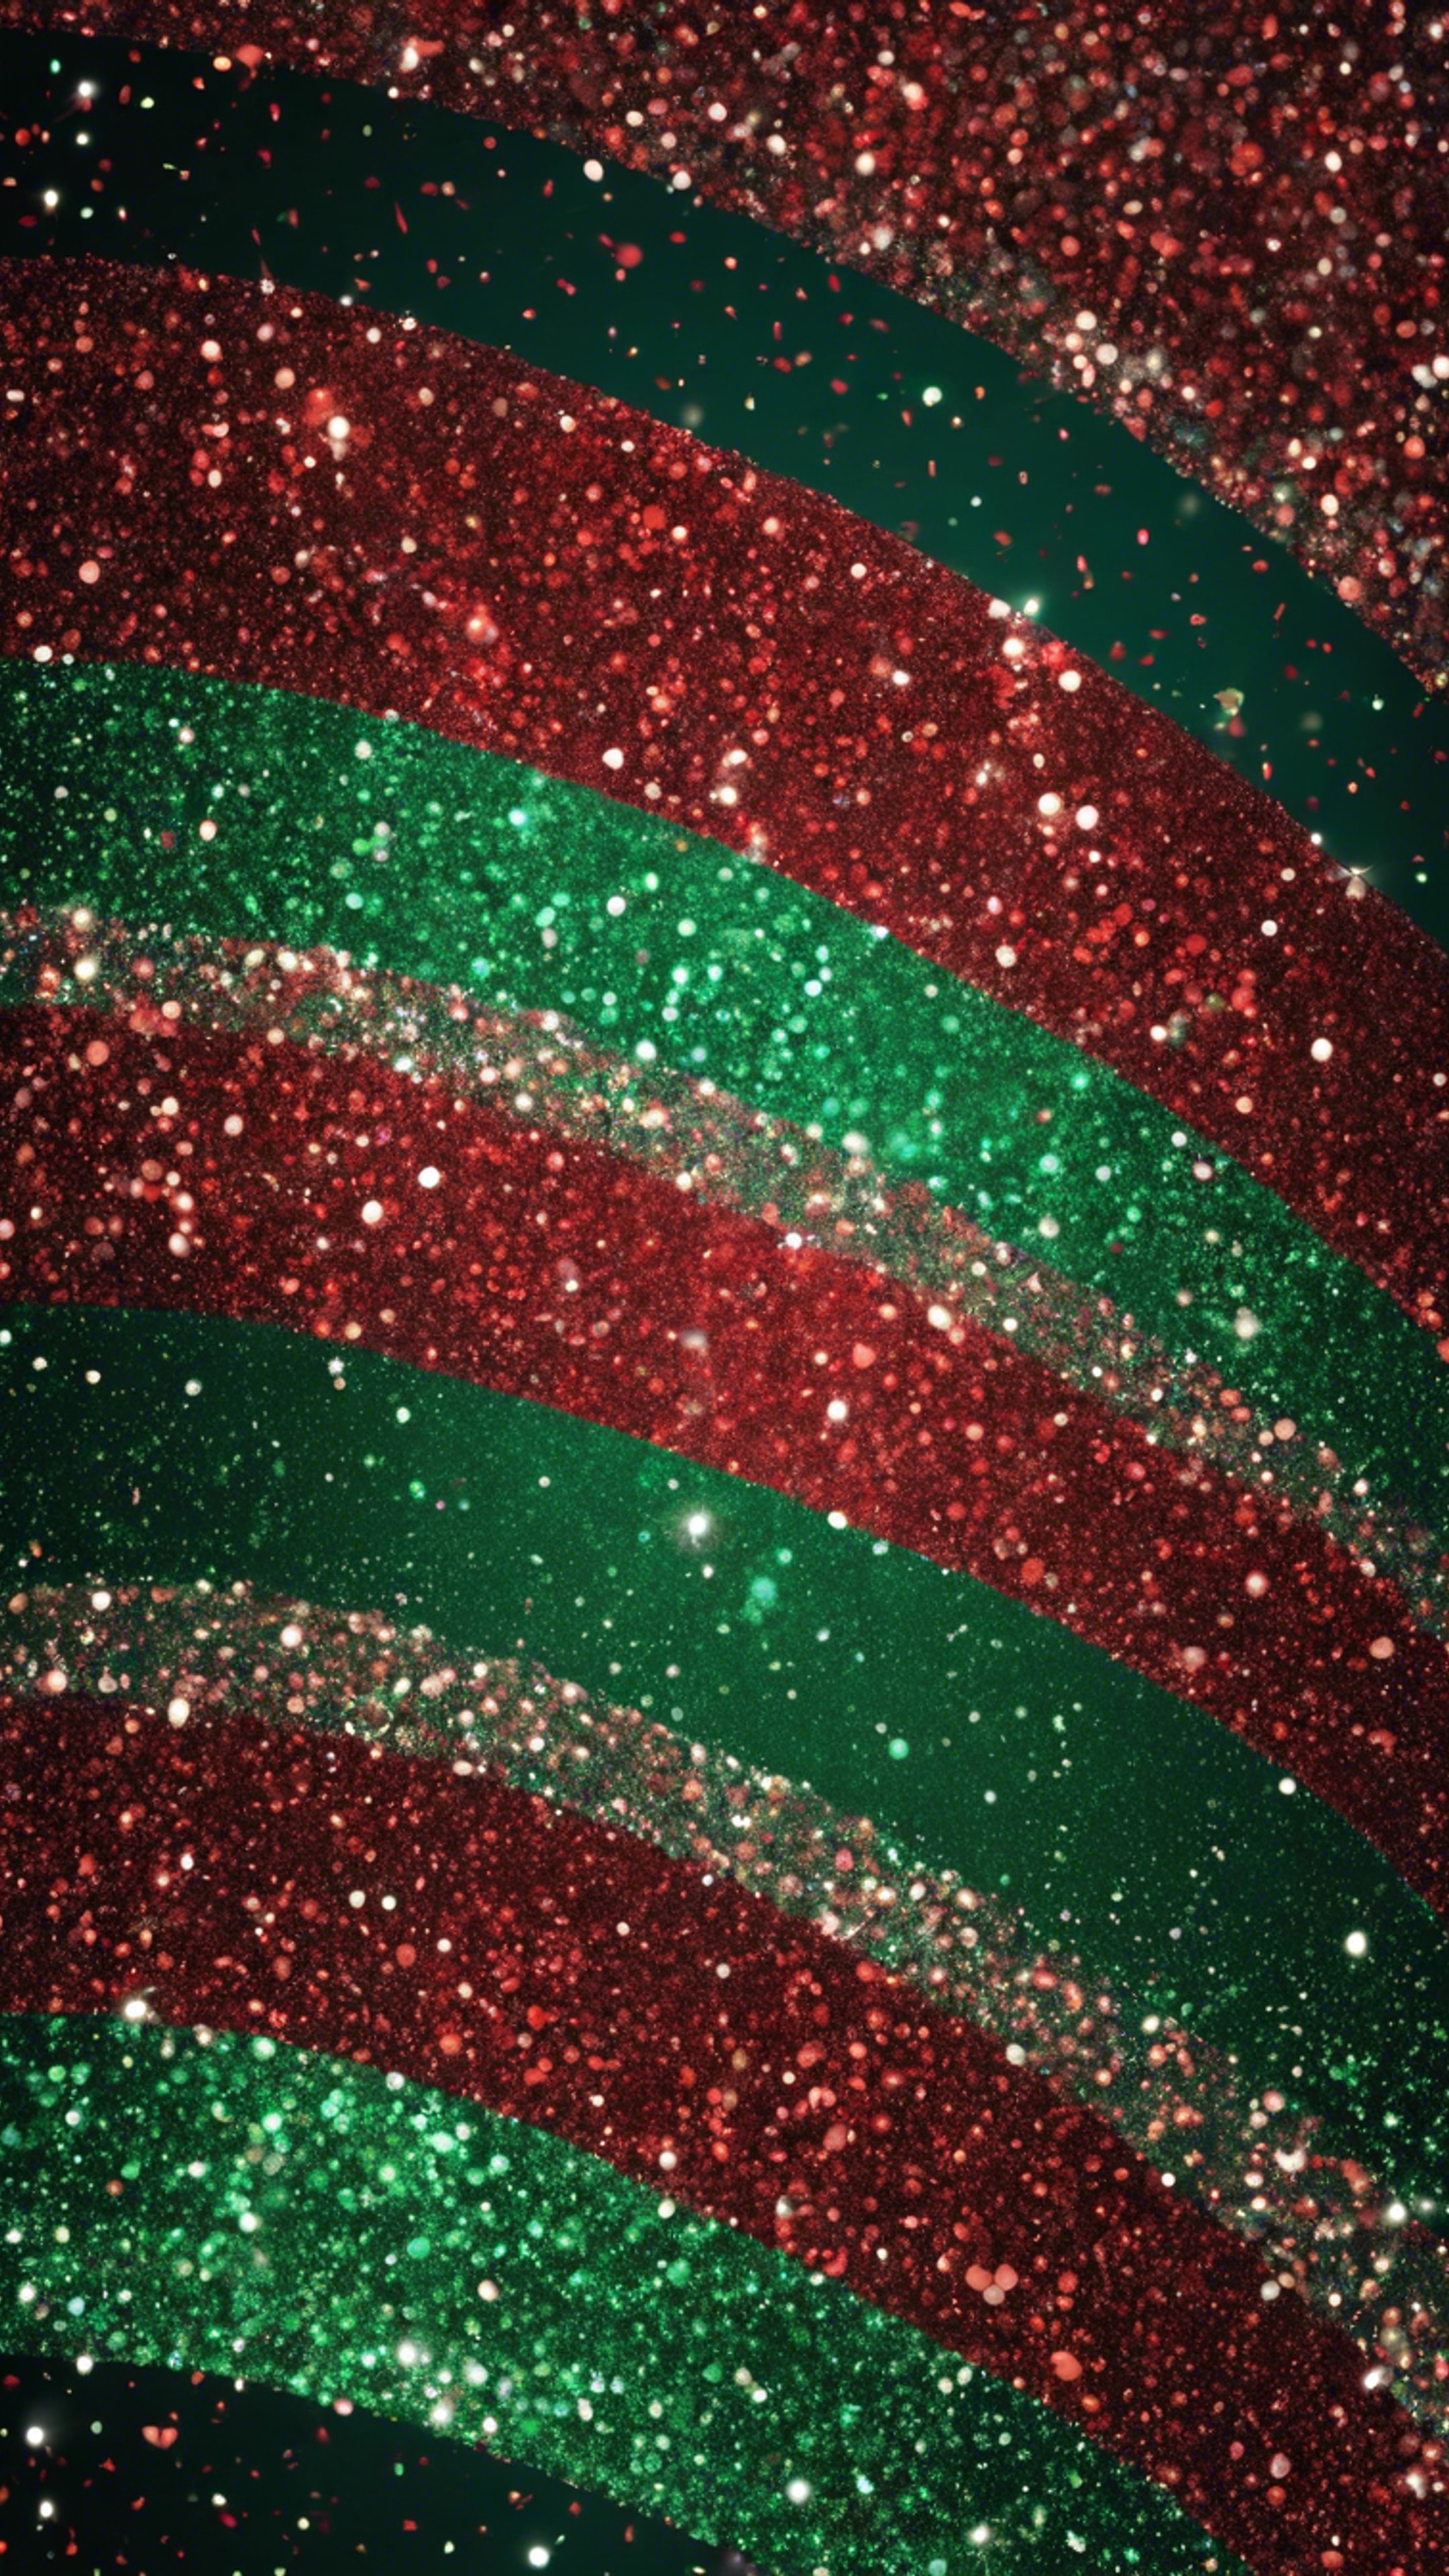 A diagonal stripes pattern made up of red and green glitters Wallpaper[e53958bfb8c54001b83e]